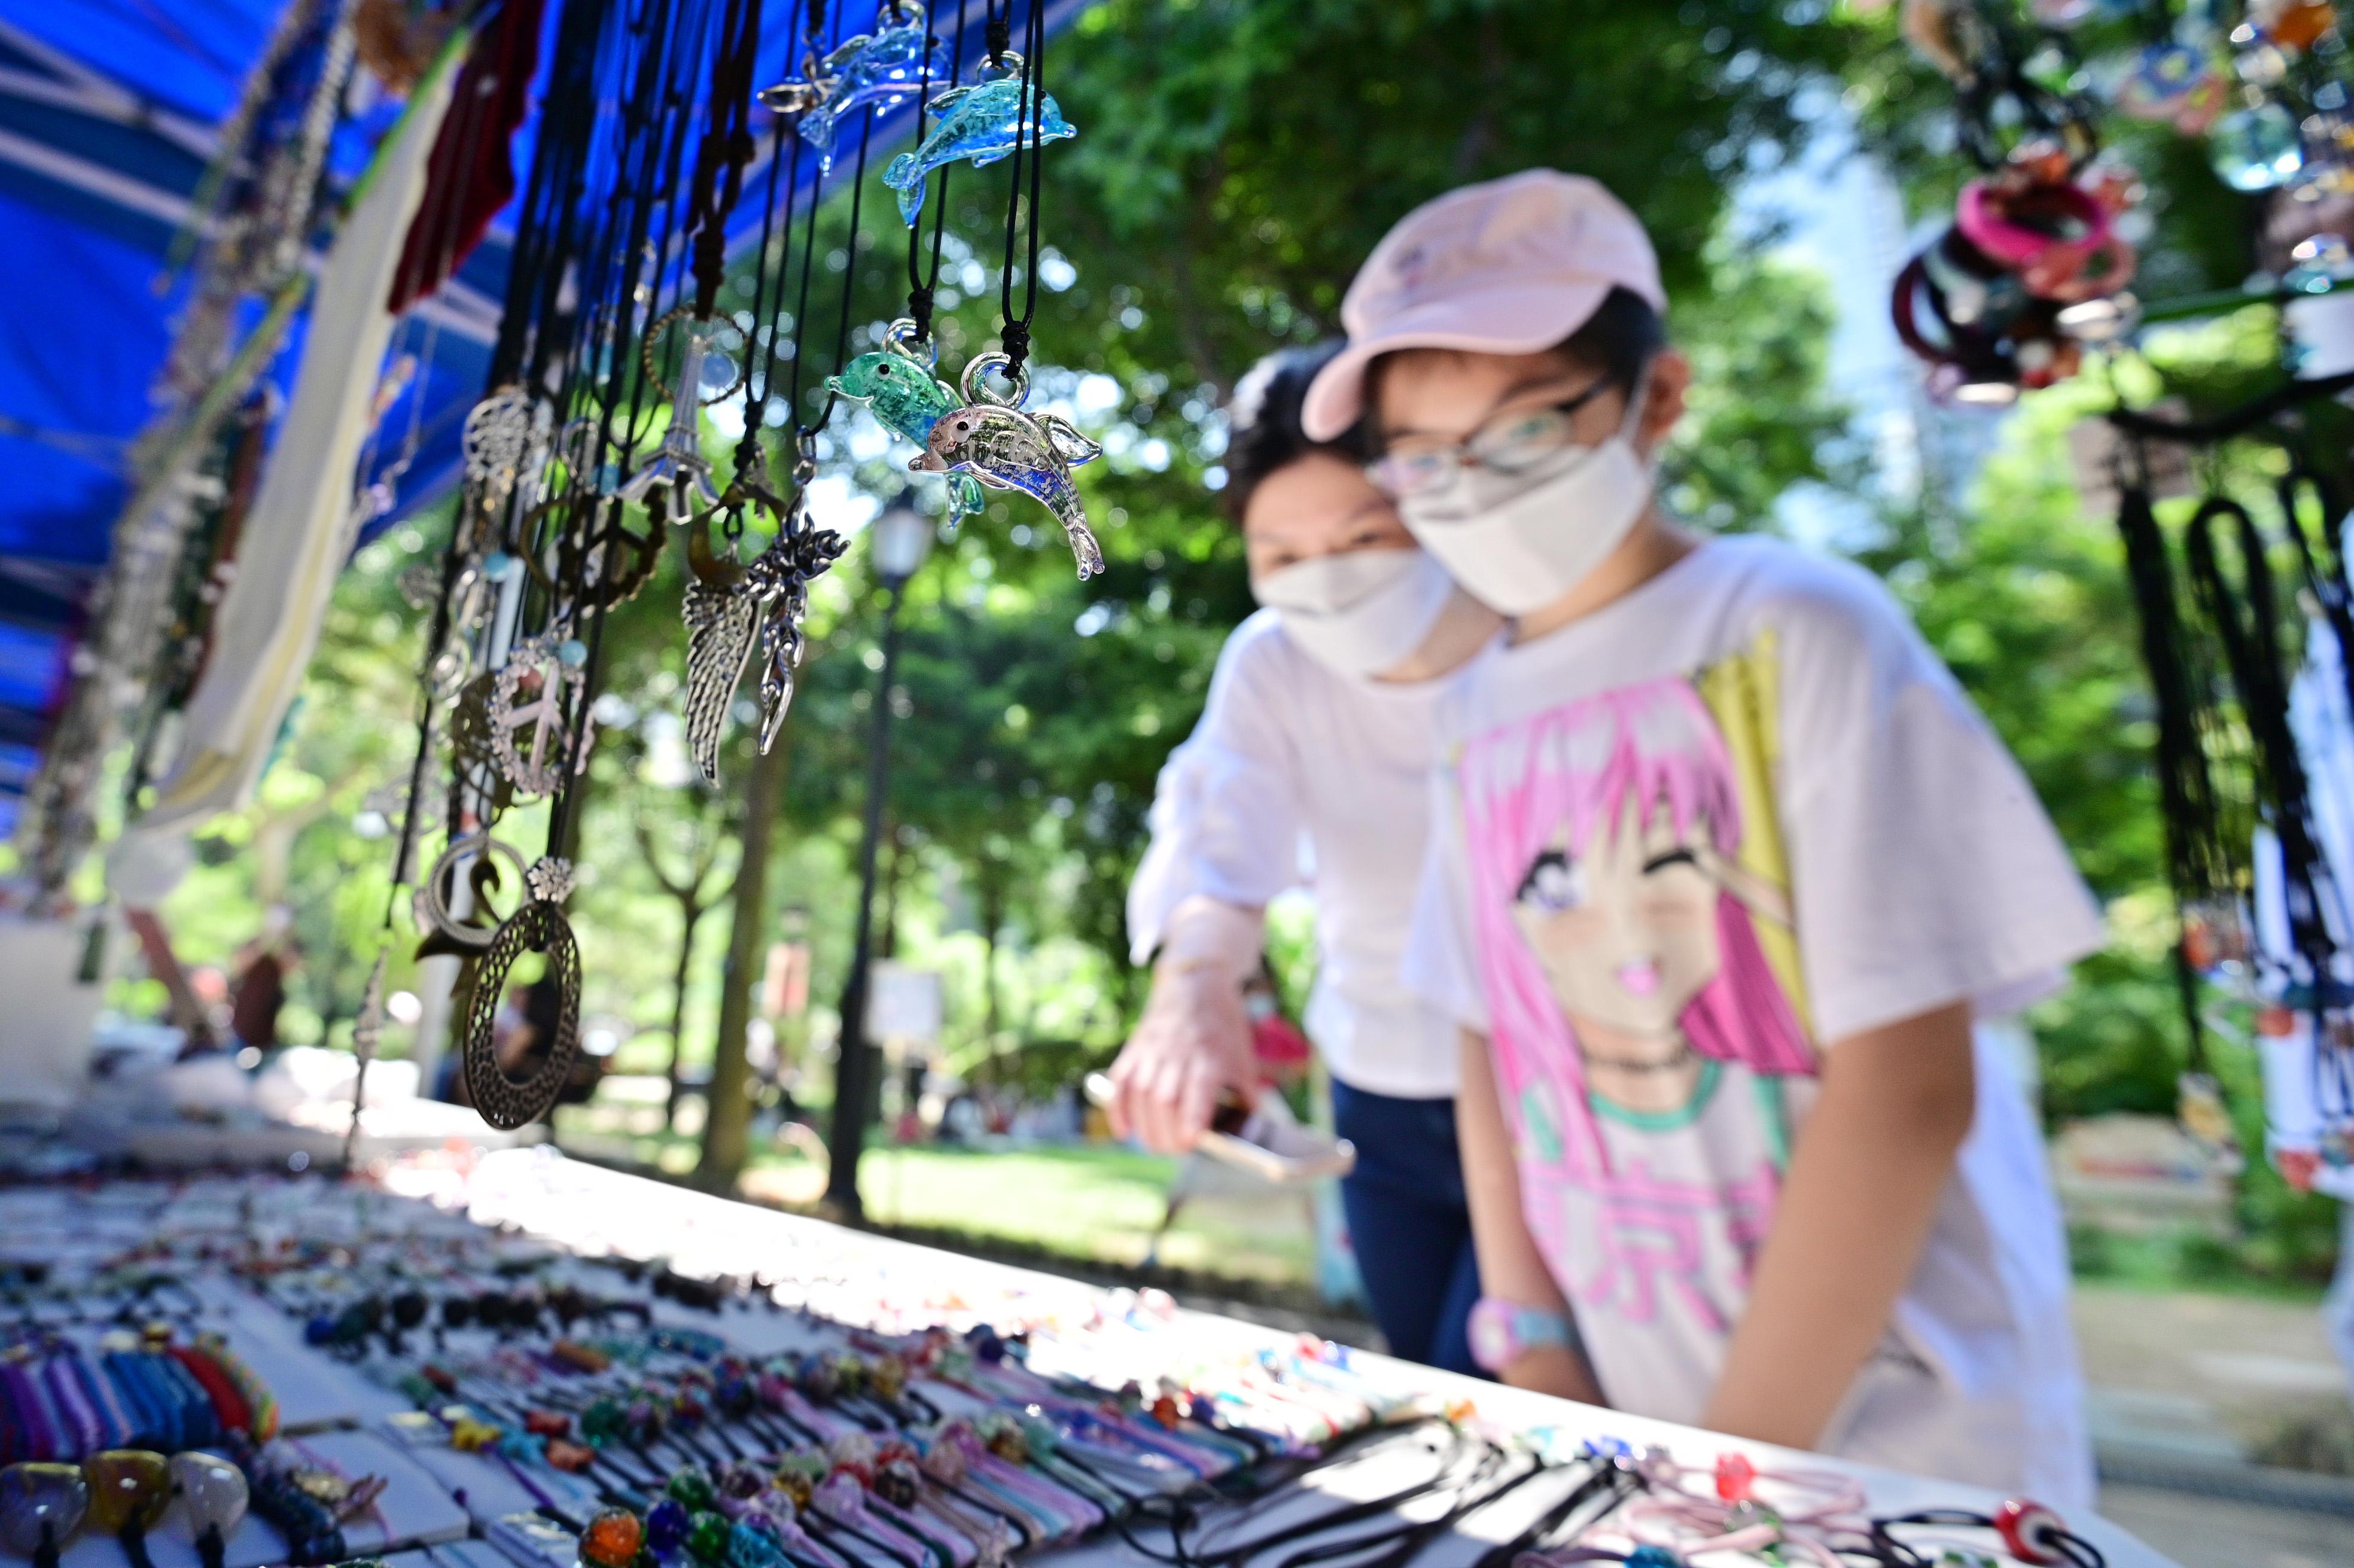 The Leisure and Cultural Services Department invites members of the public to visit the Arts Corner at Hong Kong Park on Saturdays, Sundays and public holidays from January 1 to December 31, 2023, with the aim of enhancing public interest in the arts.